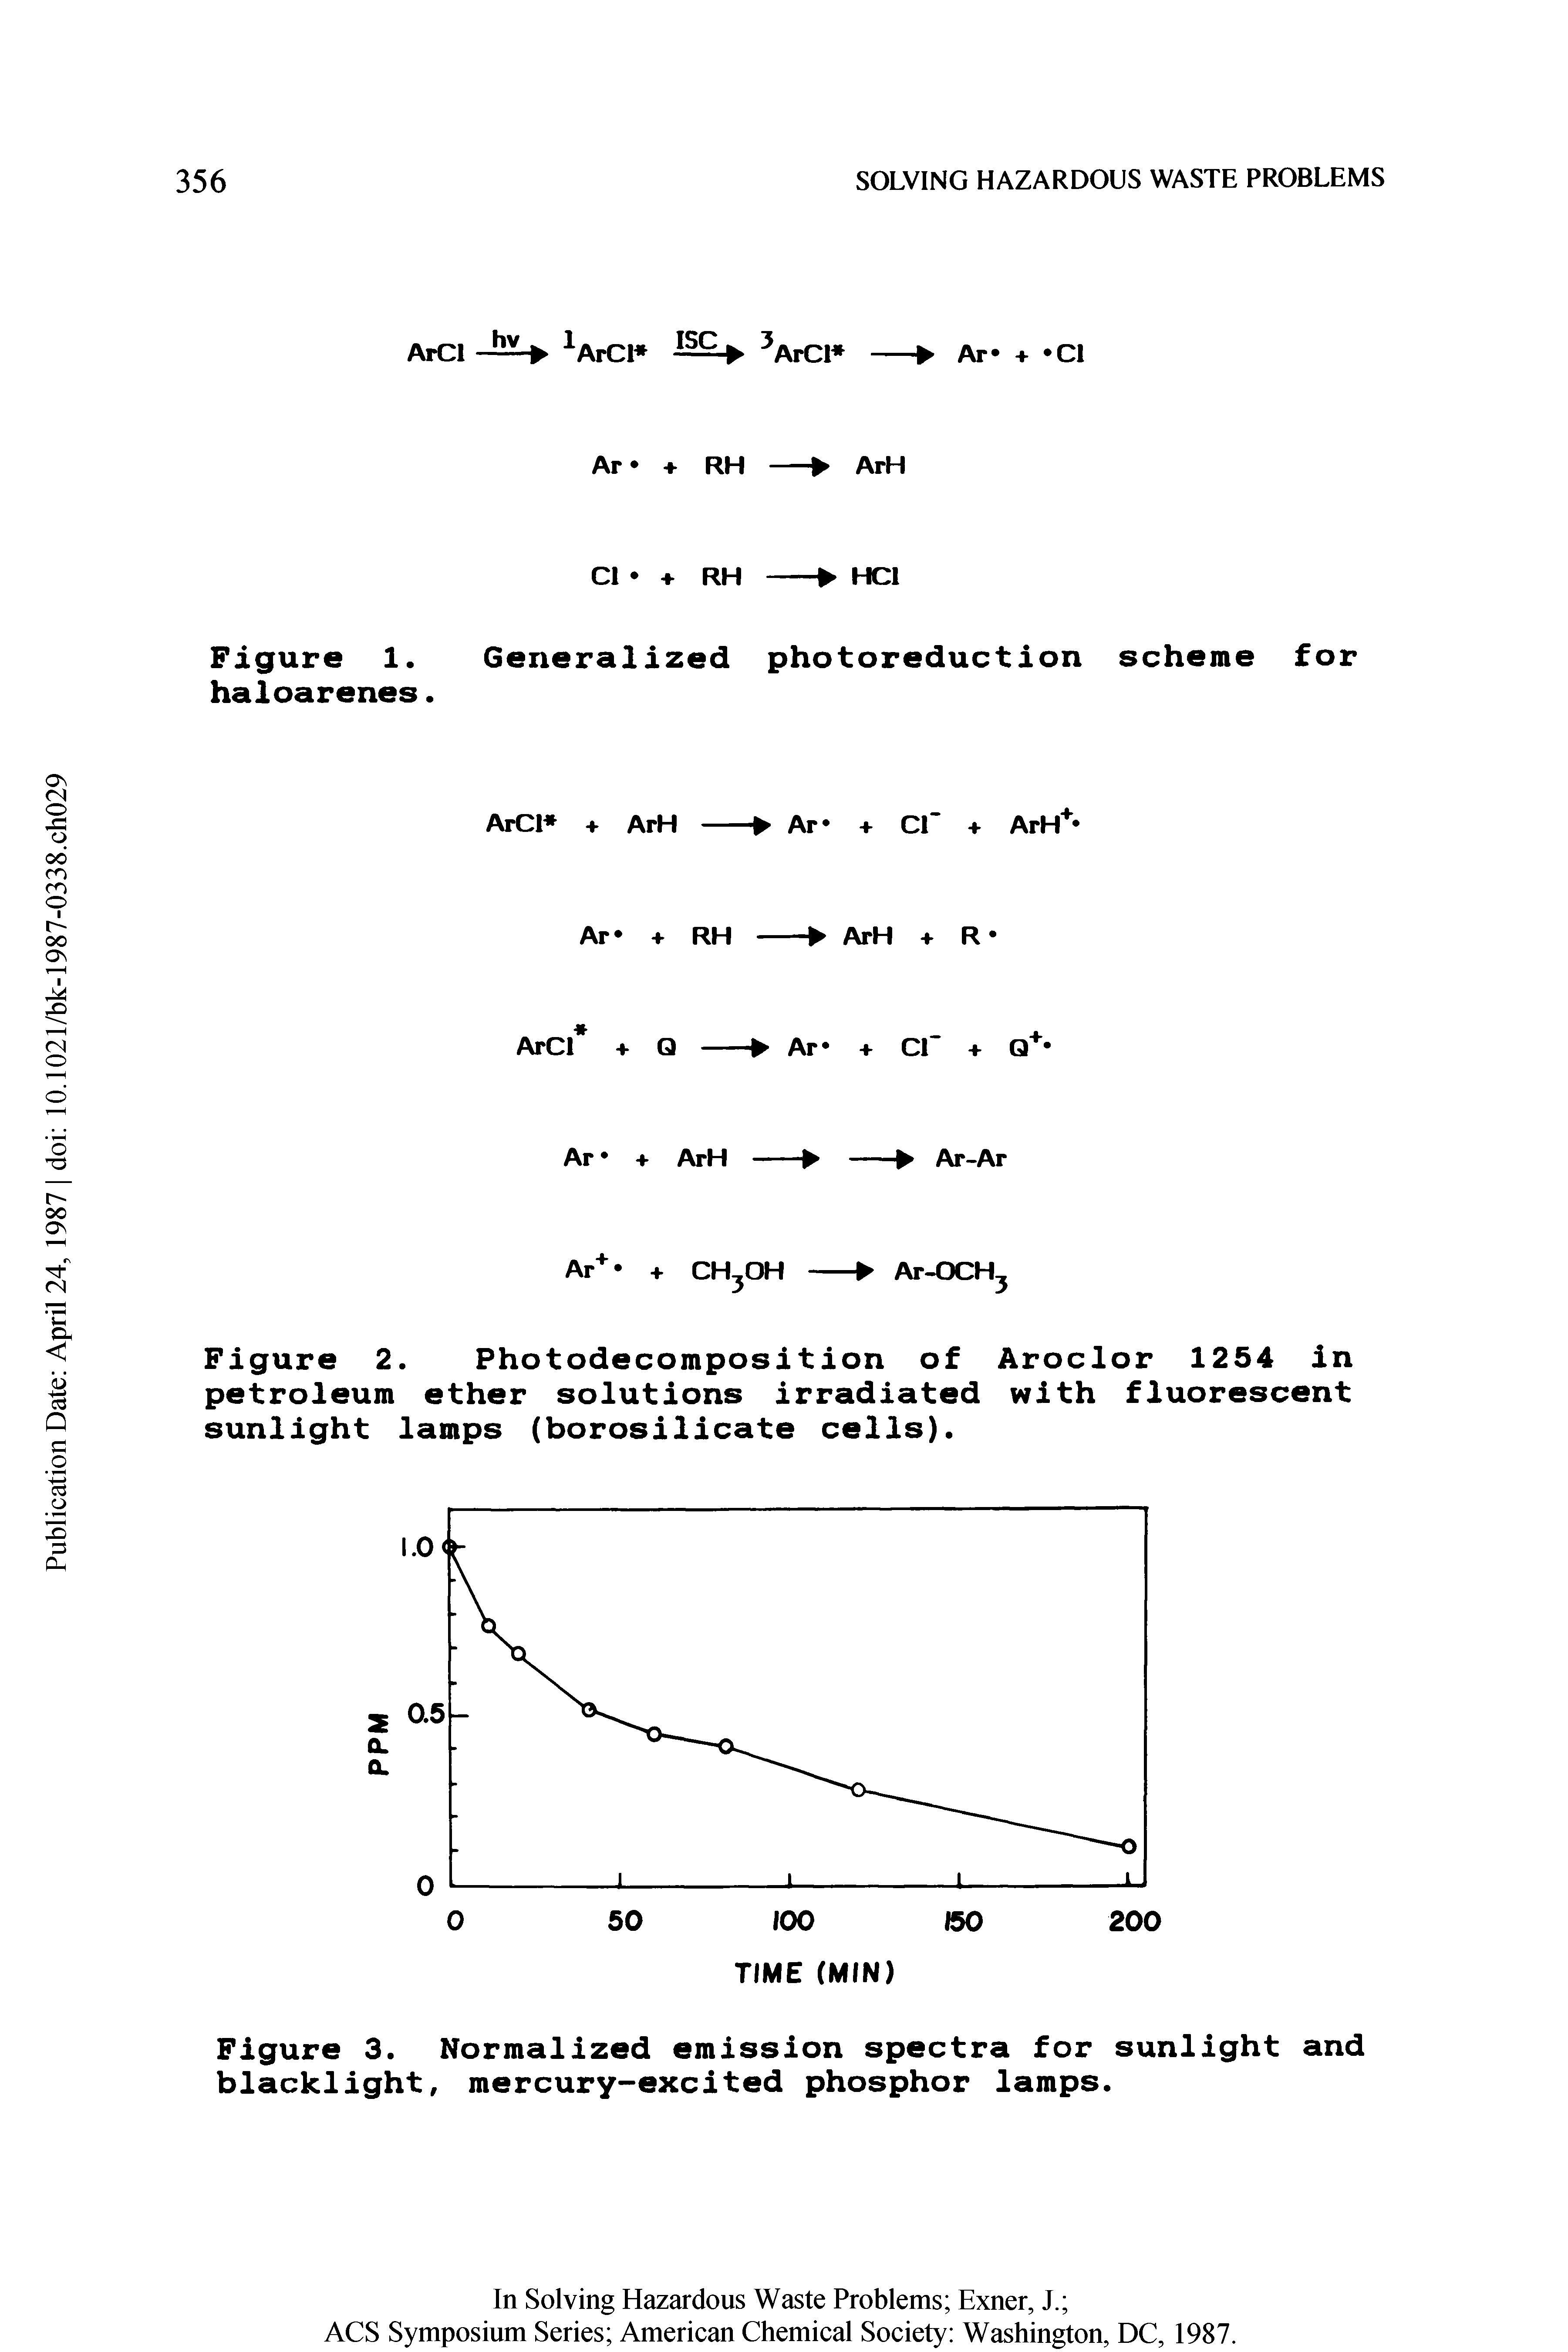 Figure 2. Photodecomposition of Aroclor 1254 in petroleum ether solutions irradiated with fluorescent sunlight lamps (borosilicate cells).